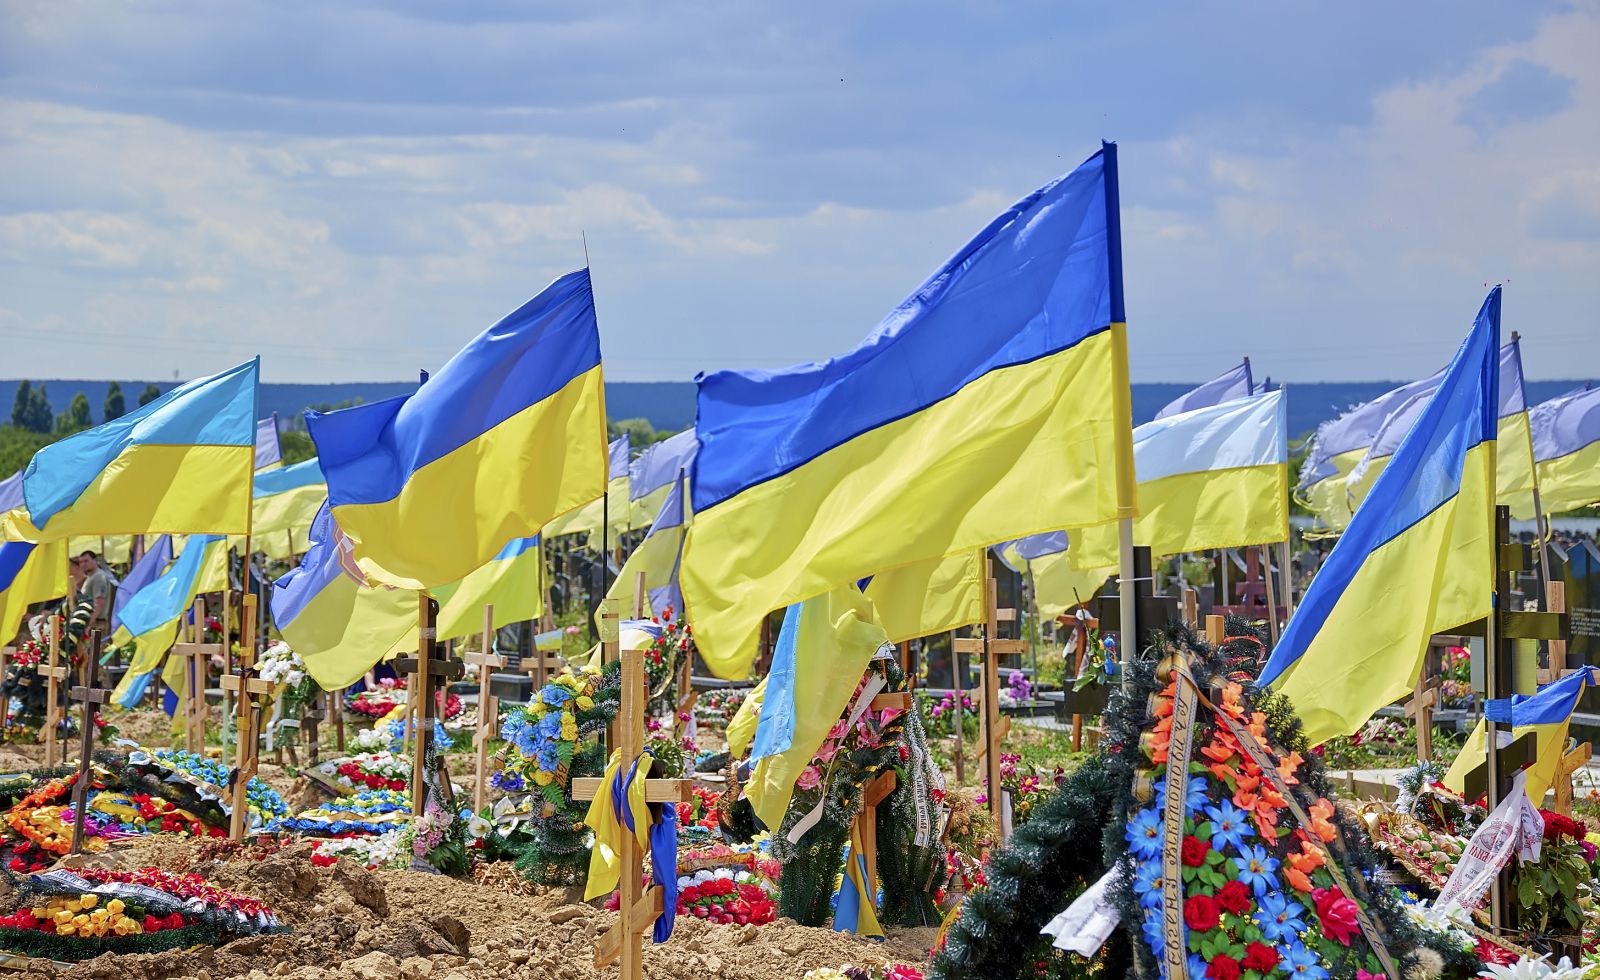 epa10013062 National flags rise above the graves of Ukrainian servicemen who died during more than three months of the Russian invasion at a cemetery in the Eastern Ukrainian city of Kharkiv, Ukraine, 14 June 2022. Russian troops on 24 February entered Ukrainian territory, starting a conflict that has provoked destruction and a humanitarian crisis.  EPA/SERGEY KOZLOV